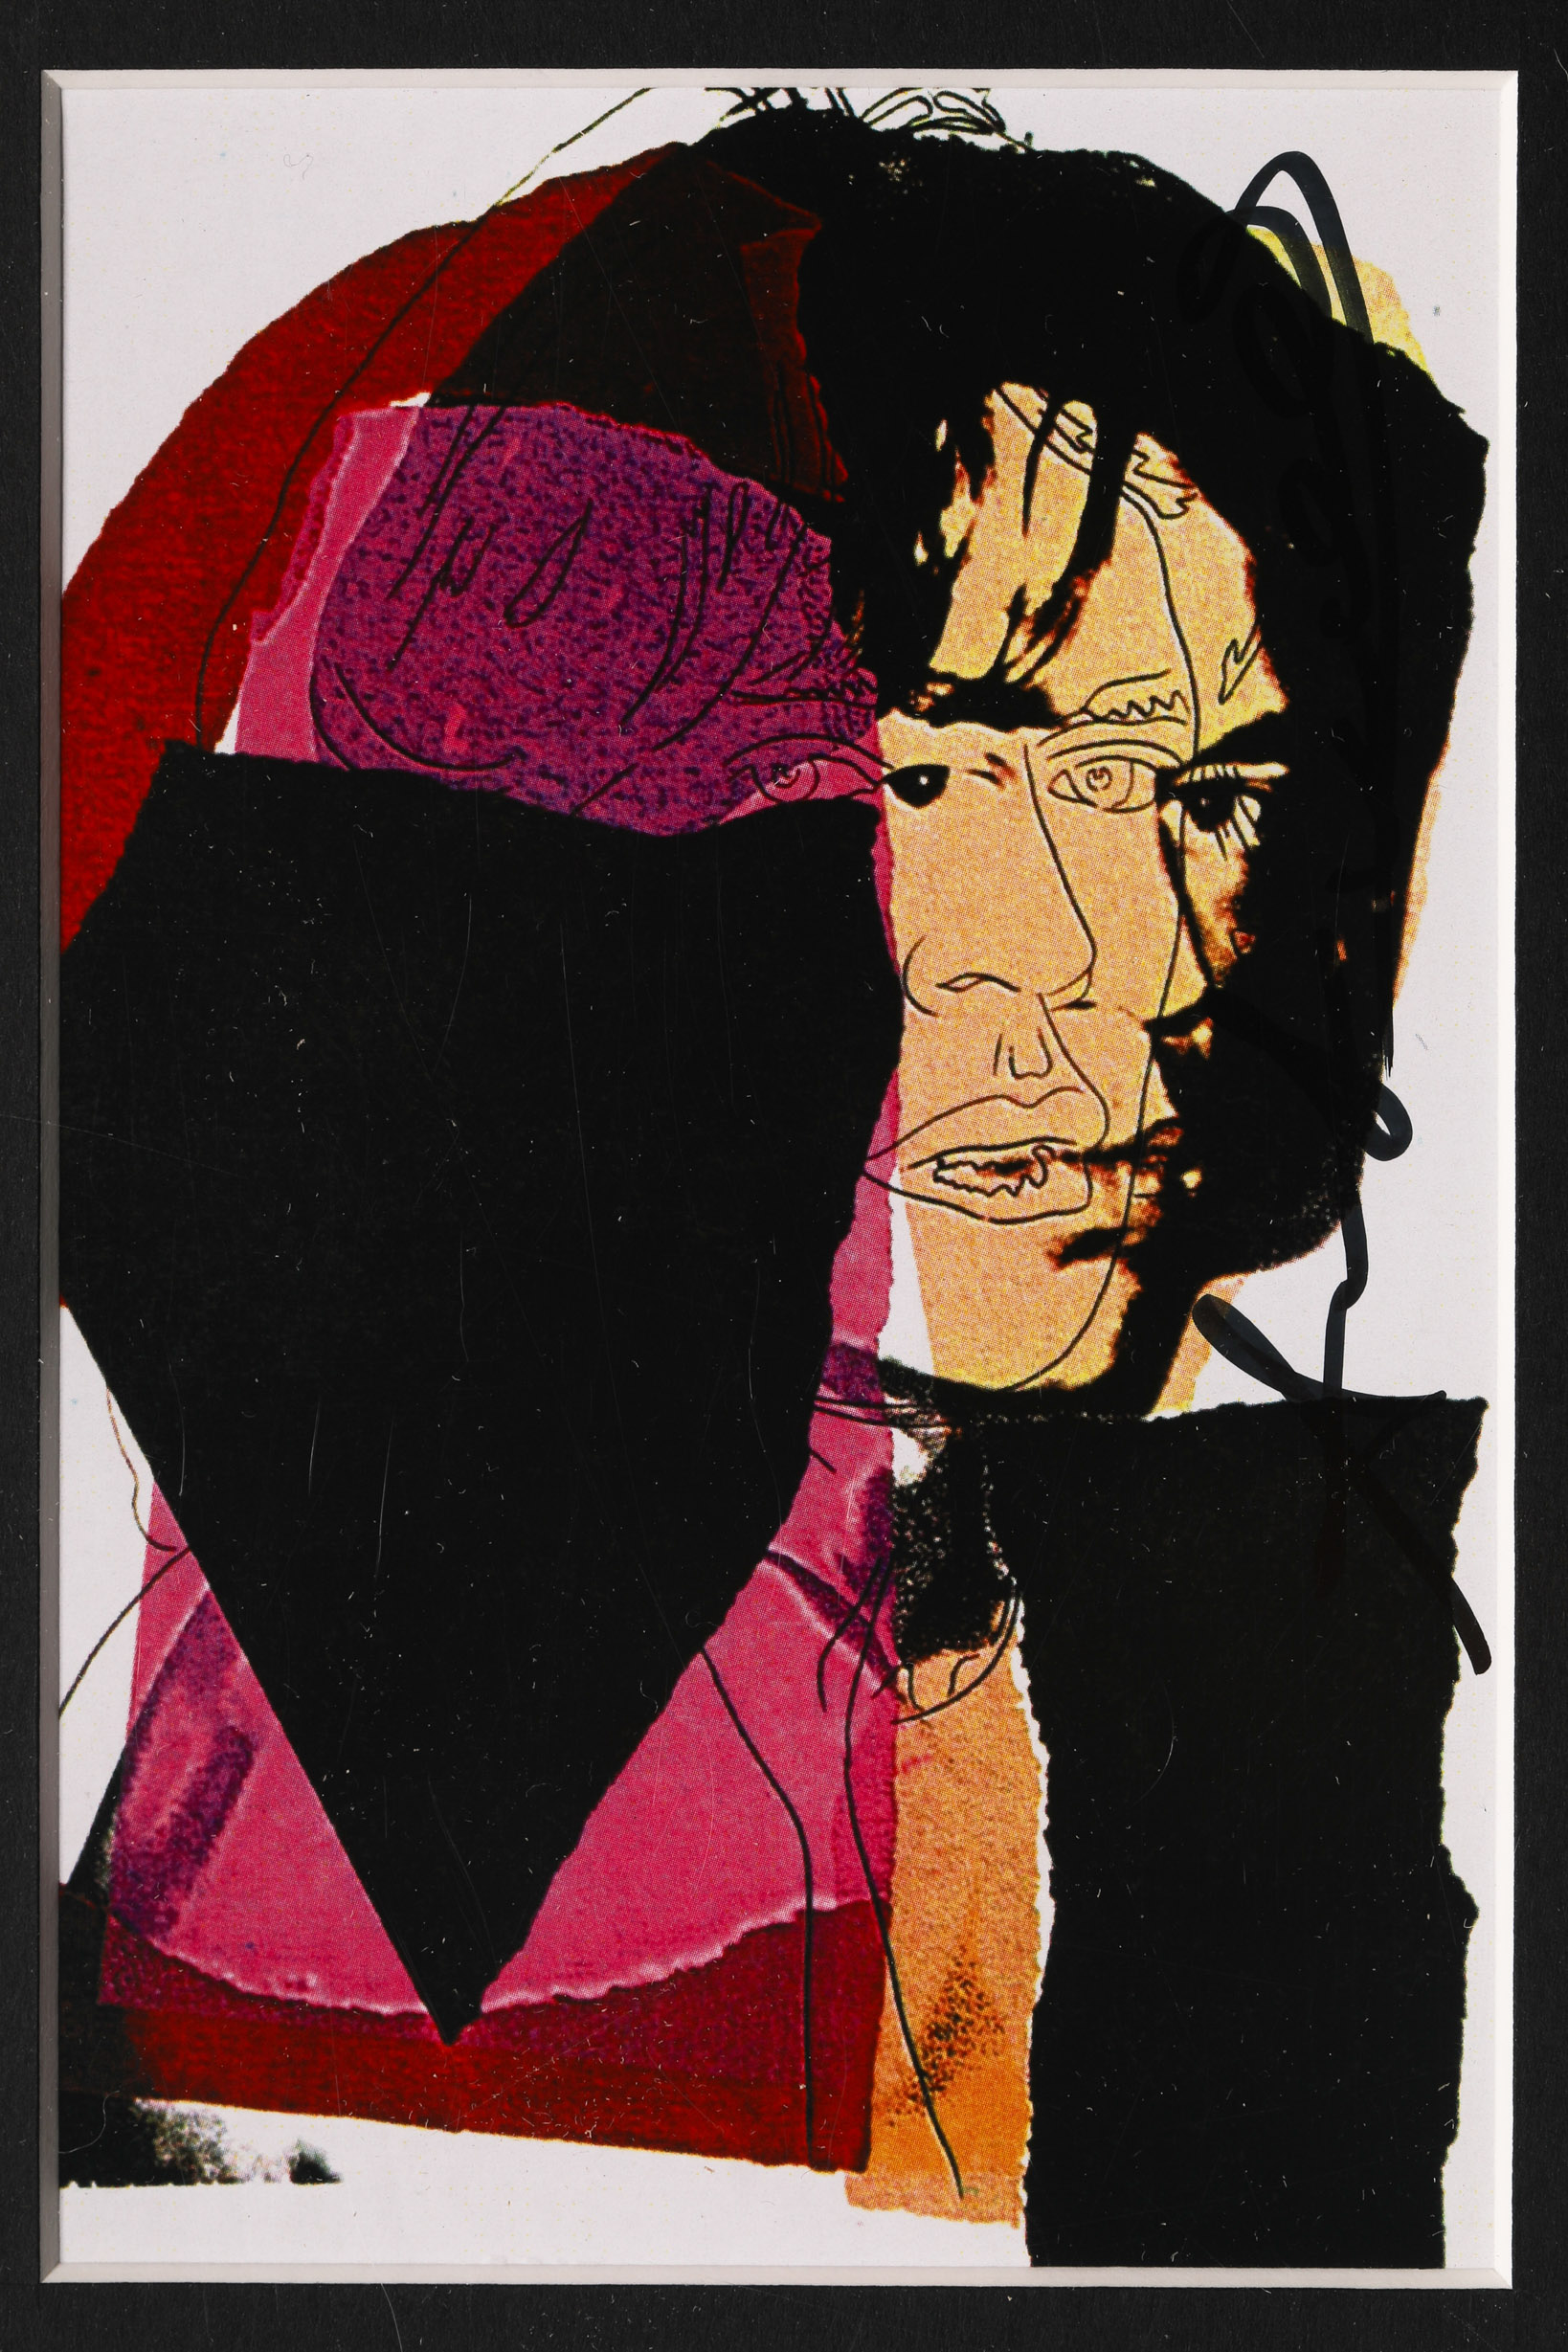 Andy Warhol, Mini Portfolio Mick Jagger with 10 Prints, 1975, signed - Image 13 of 16